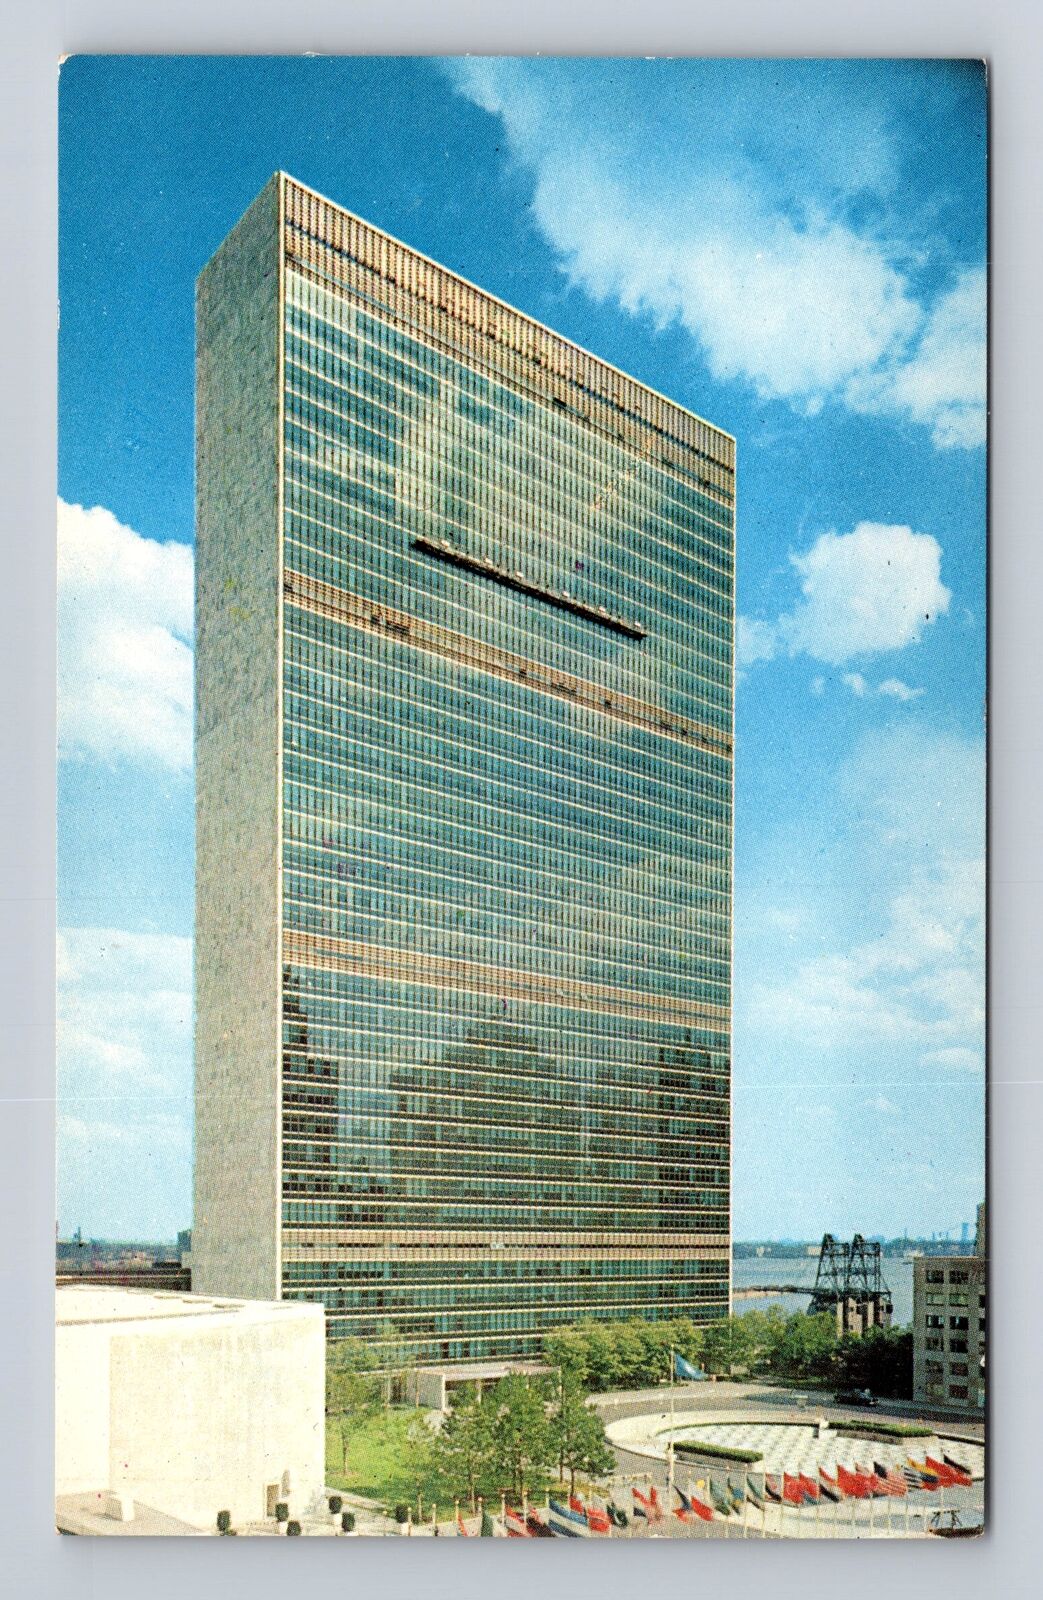 New York City NY-United Nations Headquarters, First Avenue, Vintage Postcard